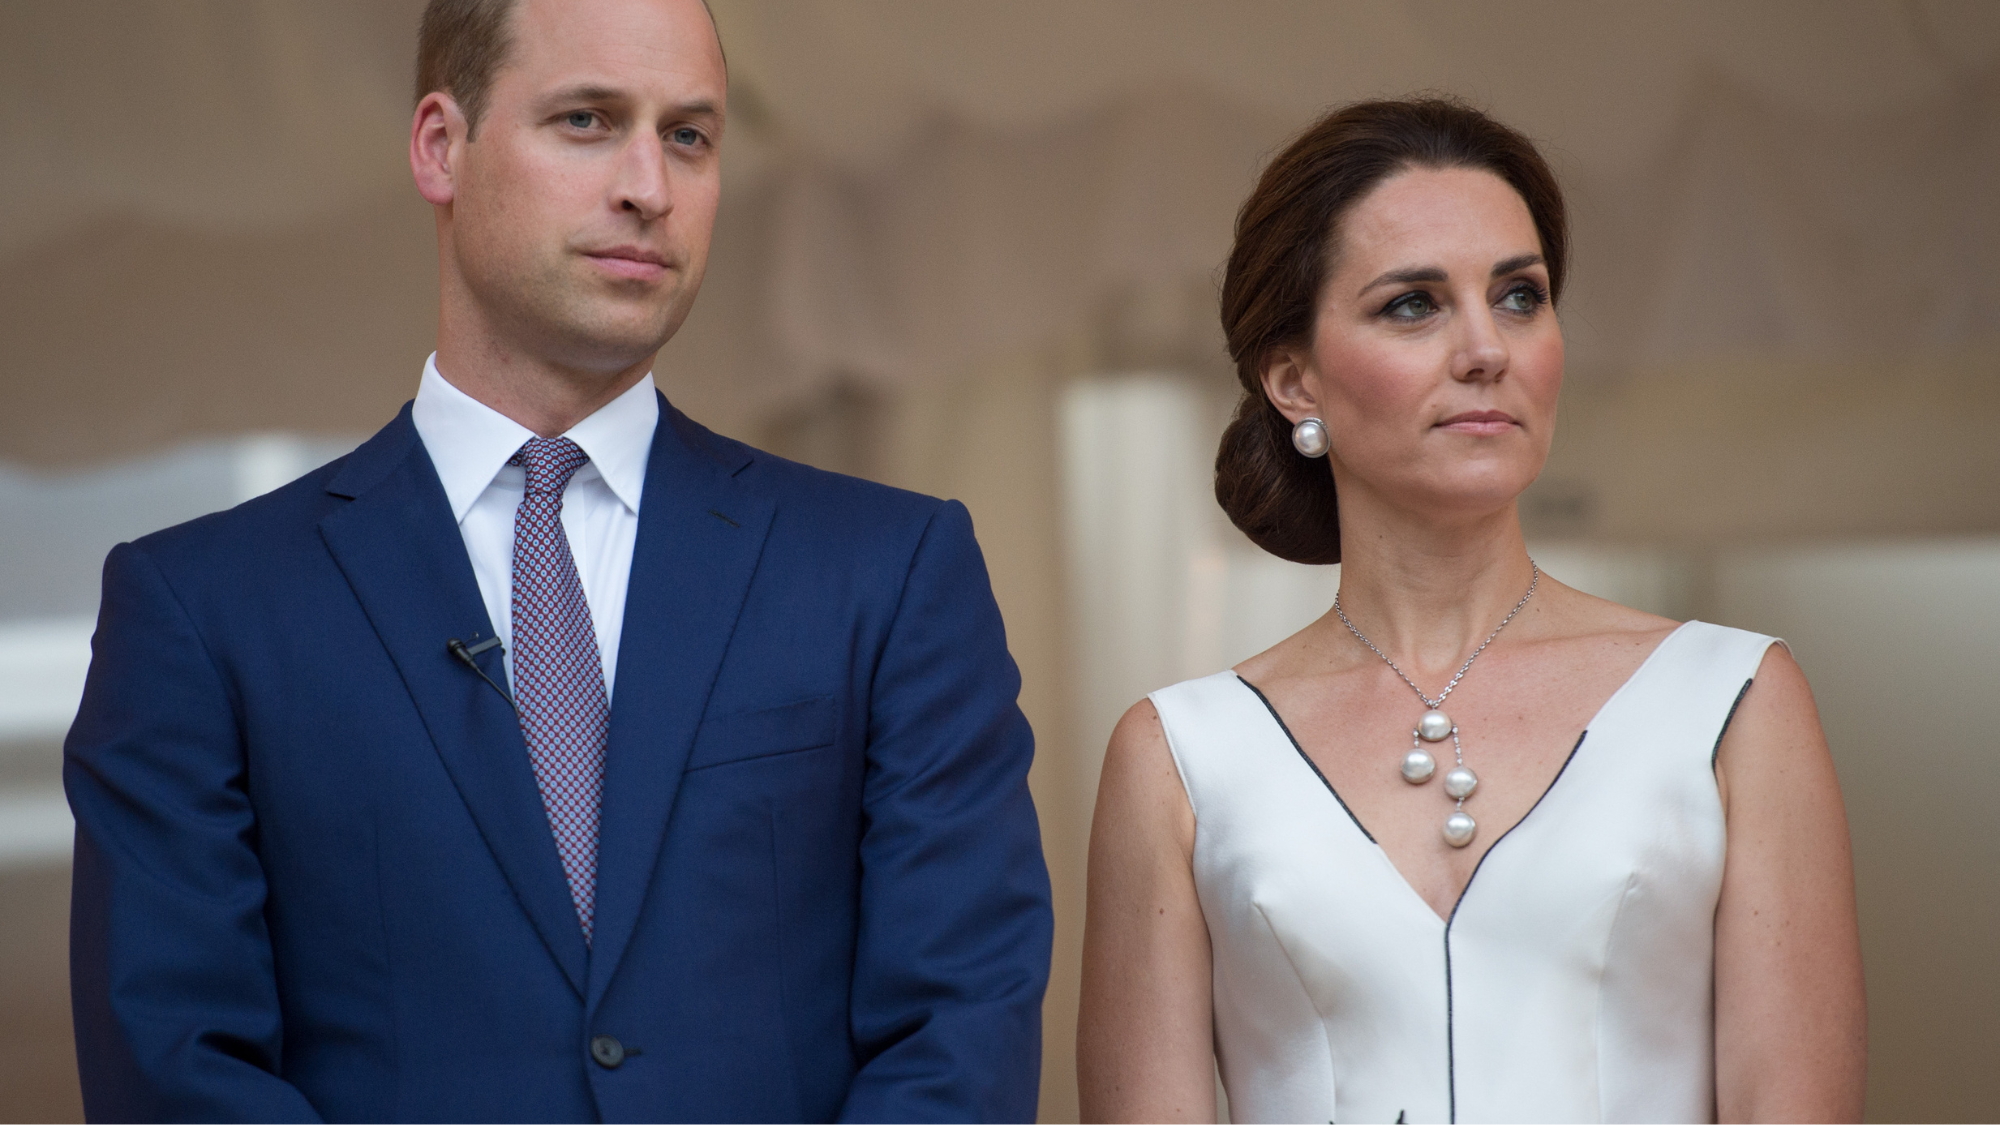 Princess Kate Looked "Furious" With Prince William on Rare Occasion She Couldn't Mask "Negative Emotions," Body Language Expert Says